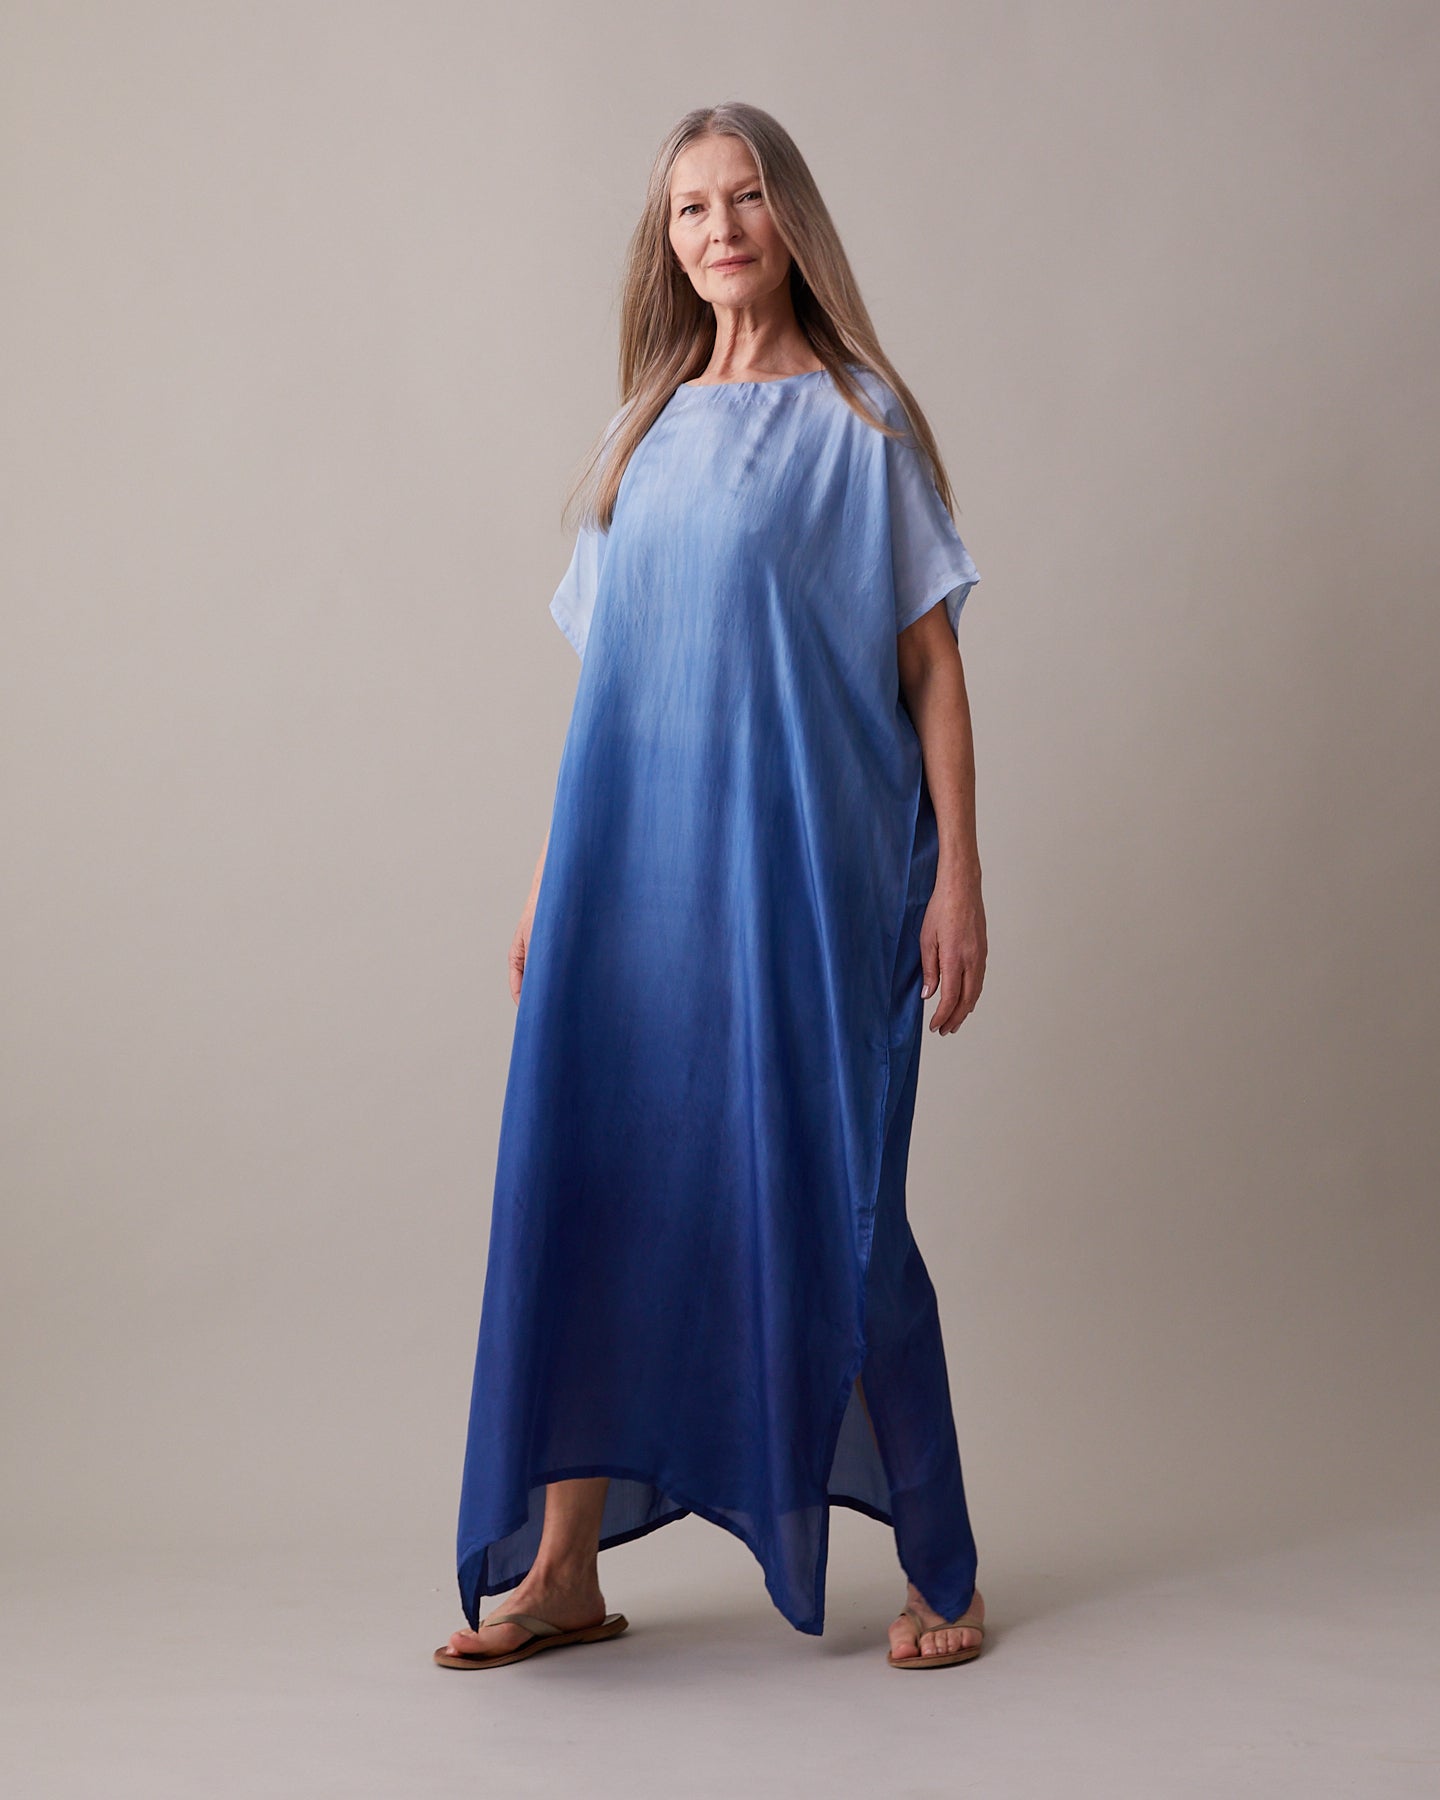 Silk dress deluxe dyed with indigo in toned expression